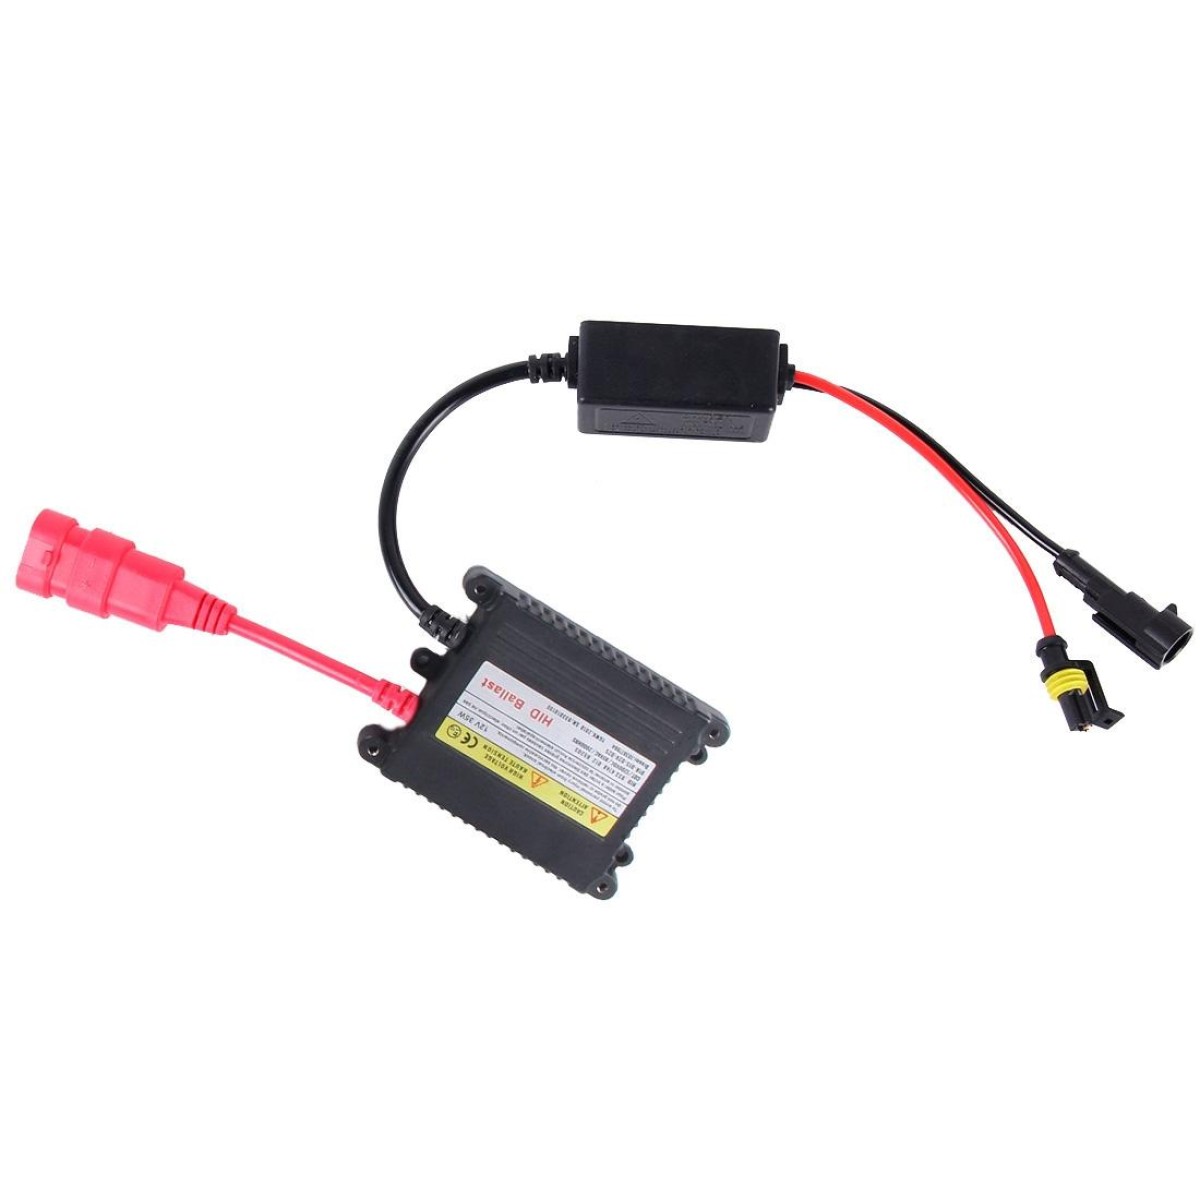 DC12V 35W 2x H1 Slim HID Xenon Light, High Intensity Discharge Lamp, Color Temperature: 8000K